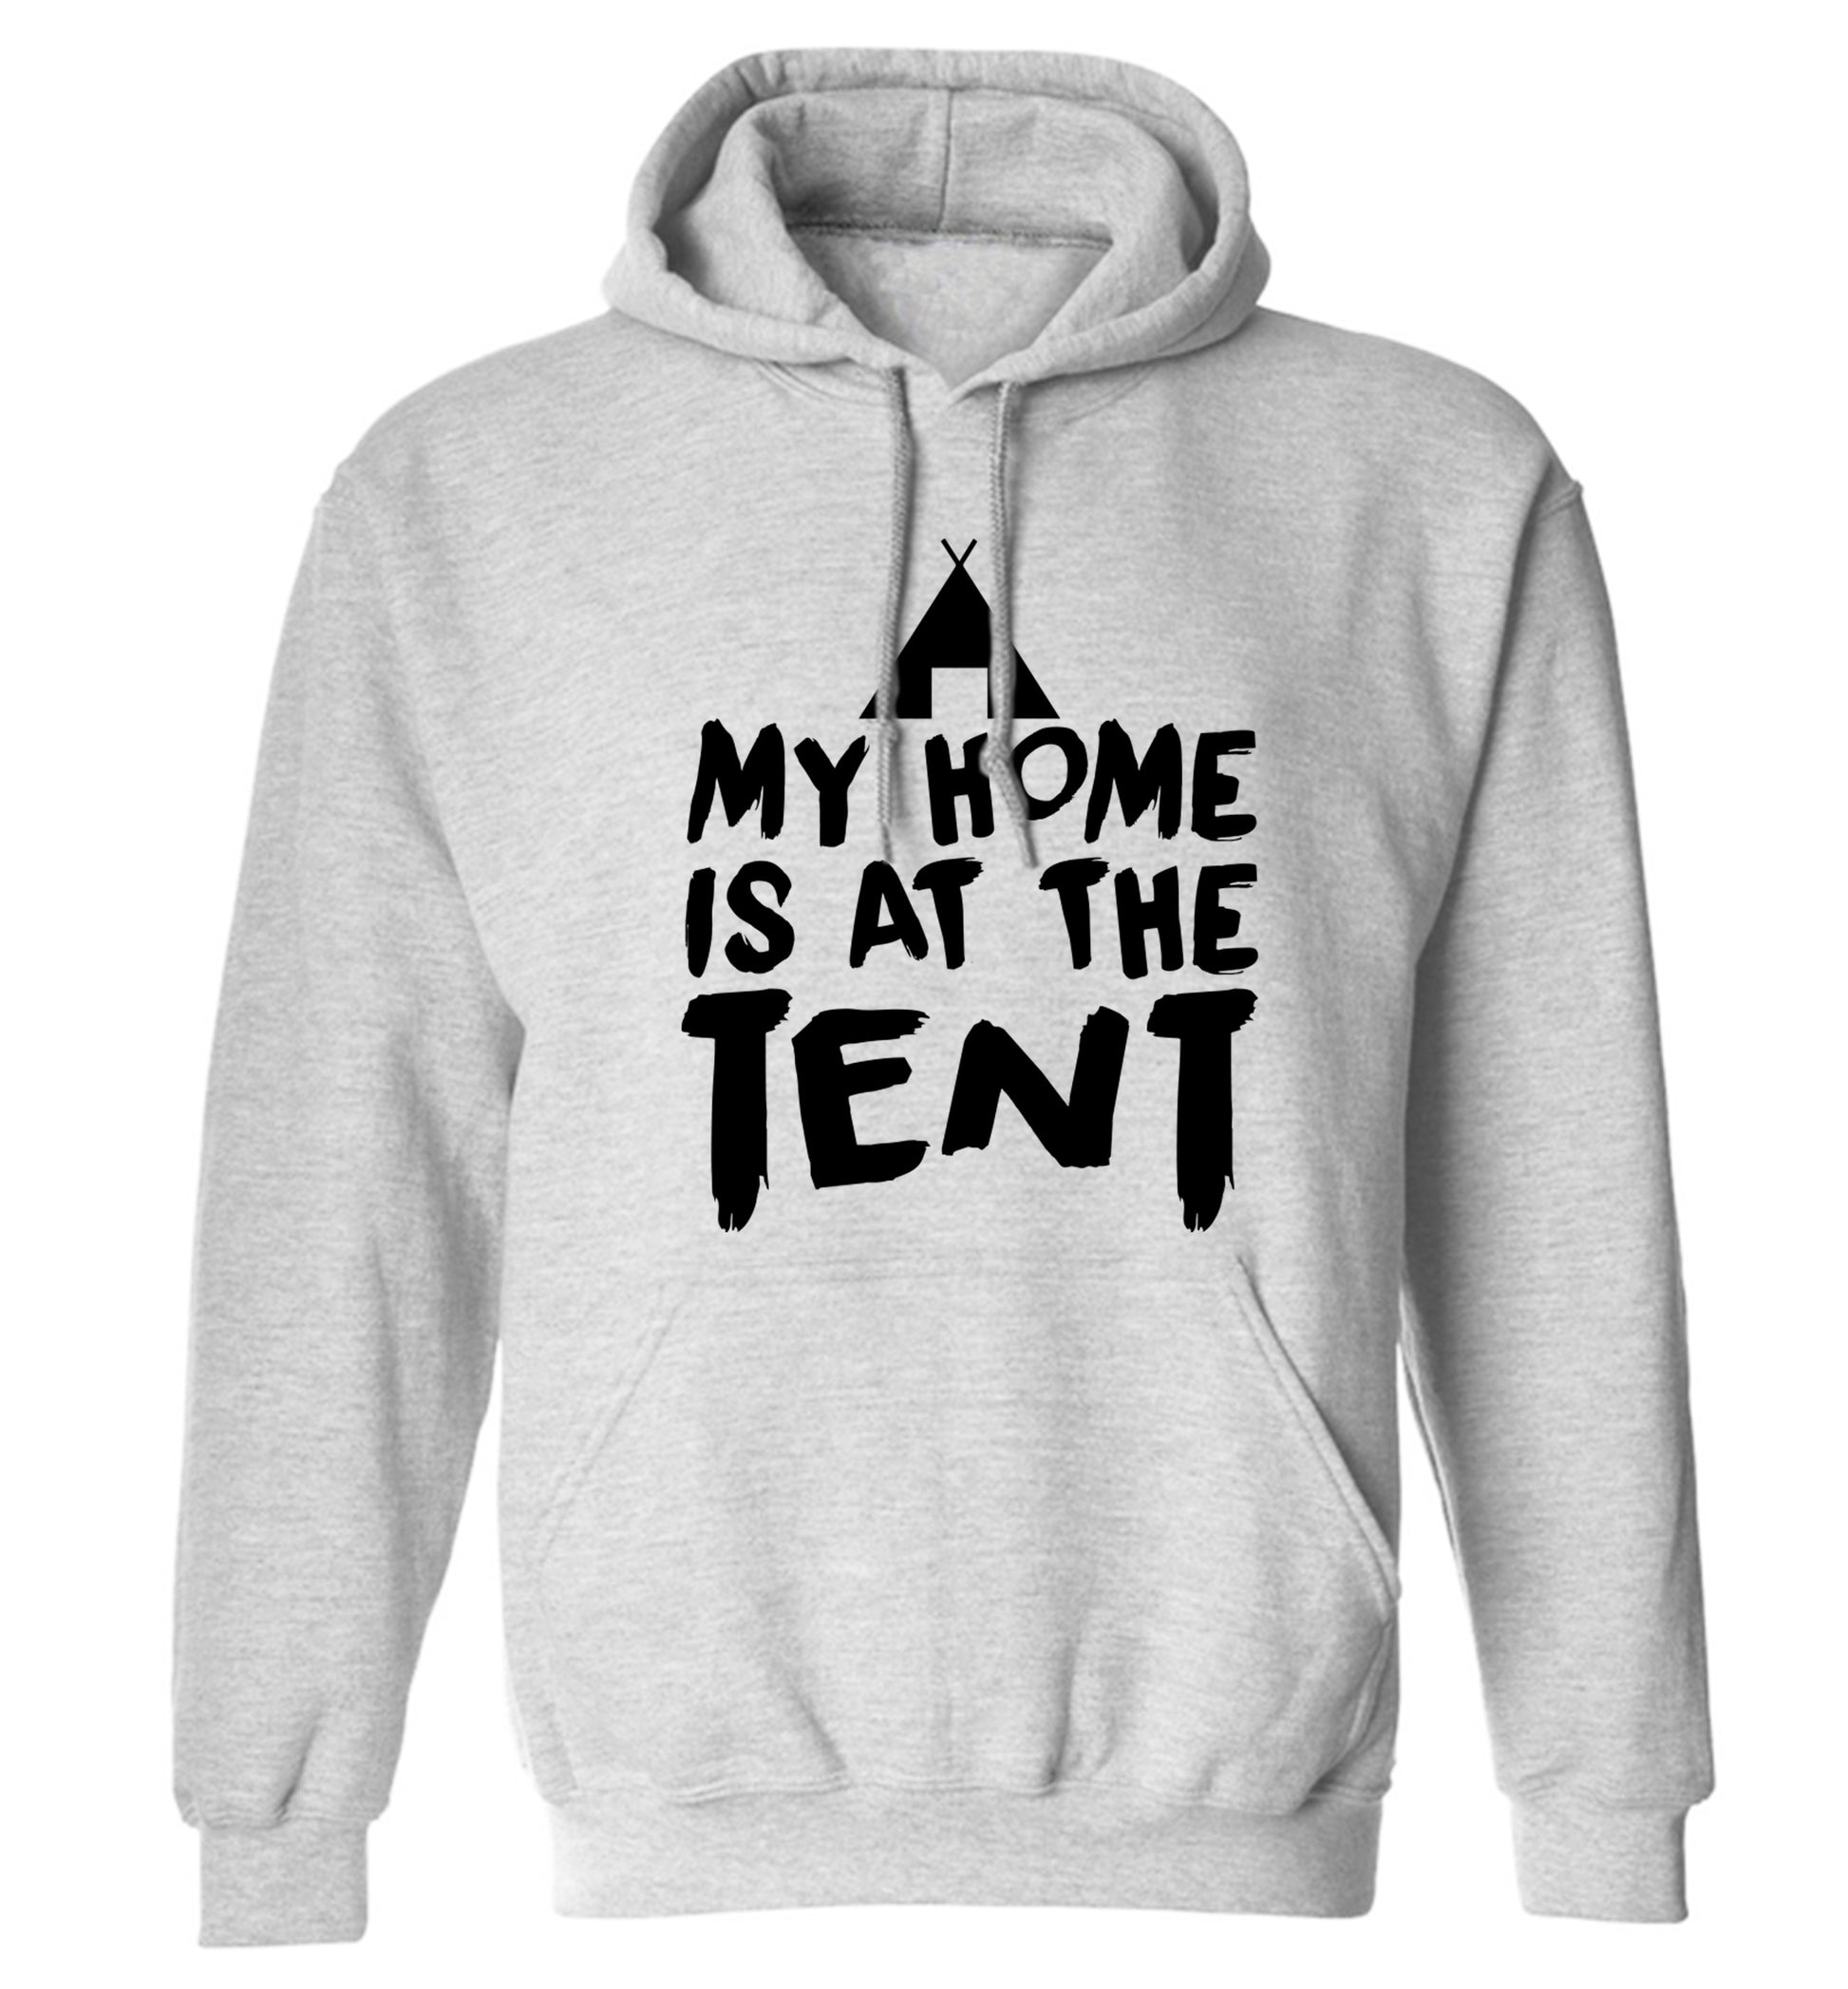 My home is at the tent adults unisex grey hoodie 2XL